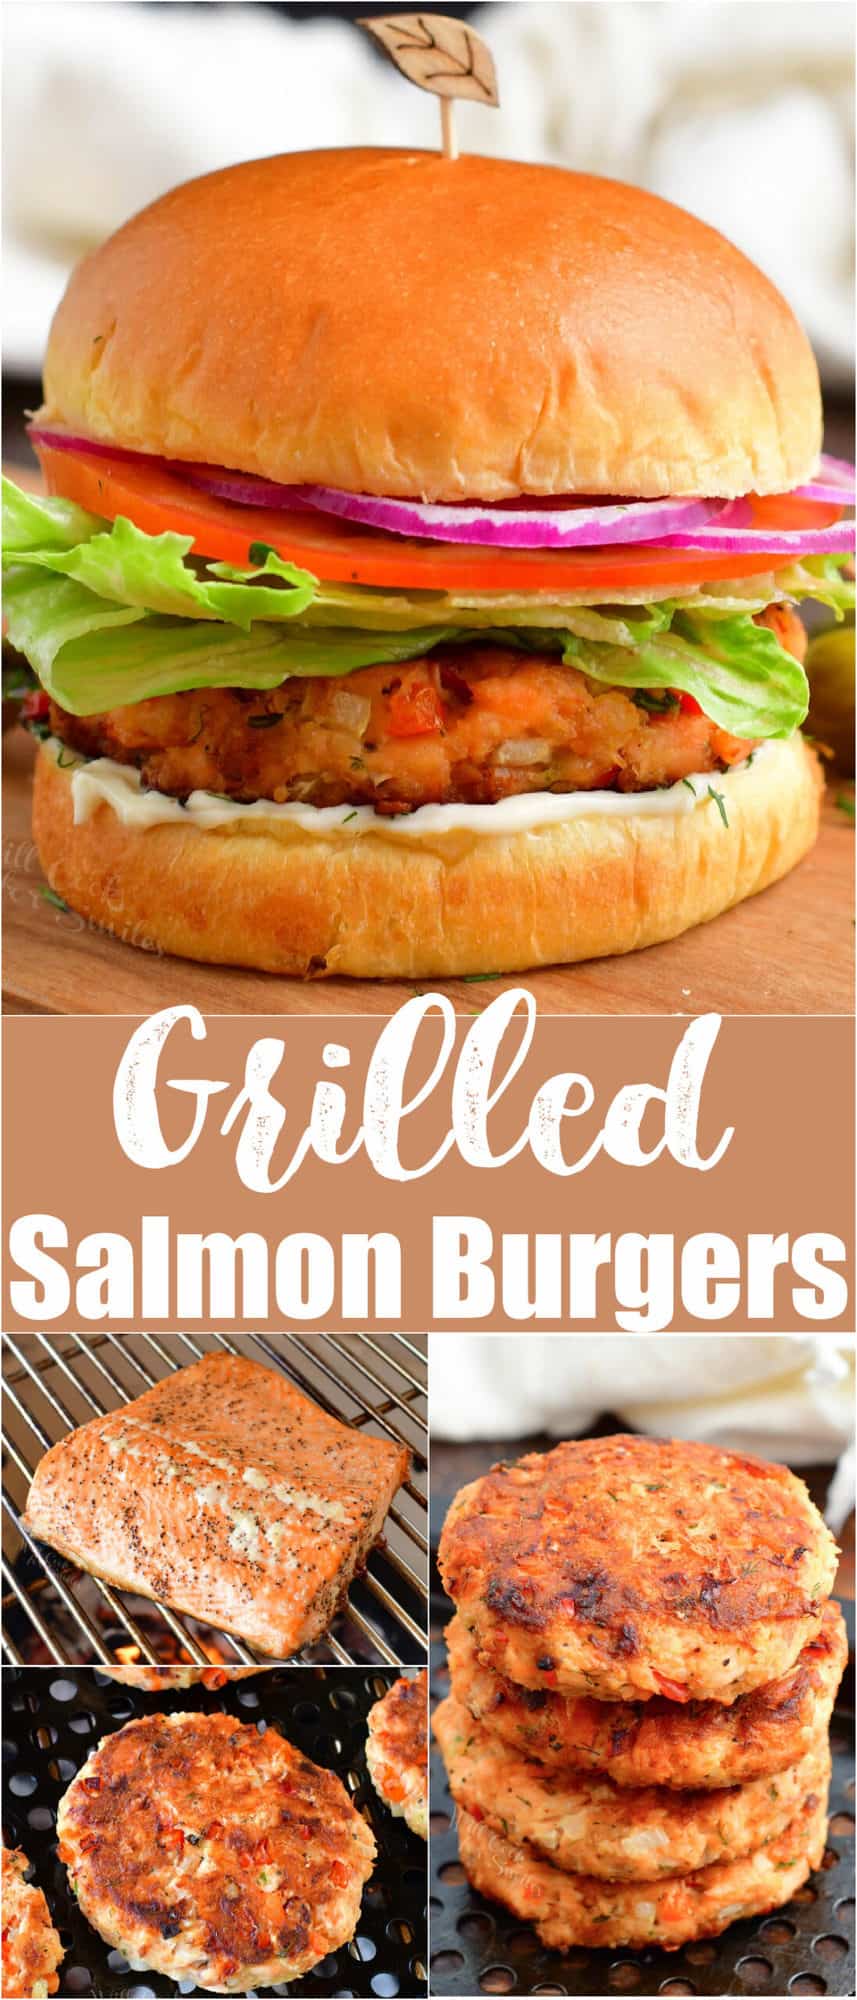 Fresh Grilled Salmon Burgers - Not From Can - Vindulge